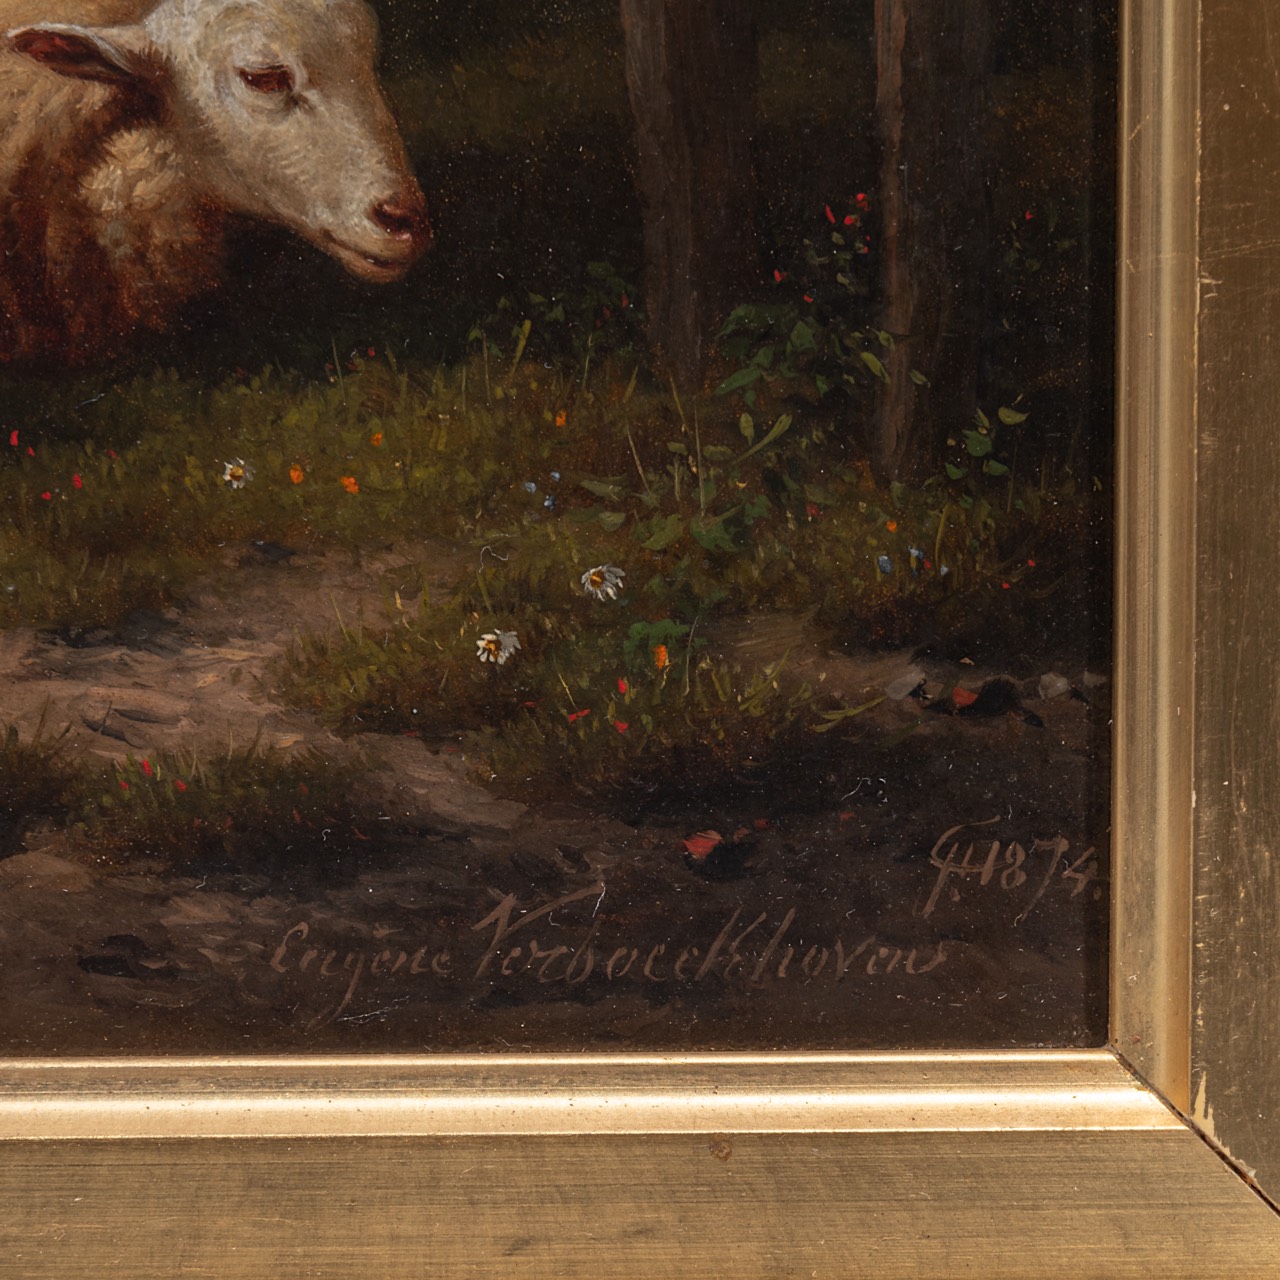 Eugene Verboeckhoven (1798-1881), Sheep and her lambs in the meadow, 1874, oil on panel 23 x 32 cm. - Image 11 of 14